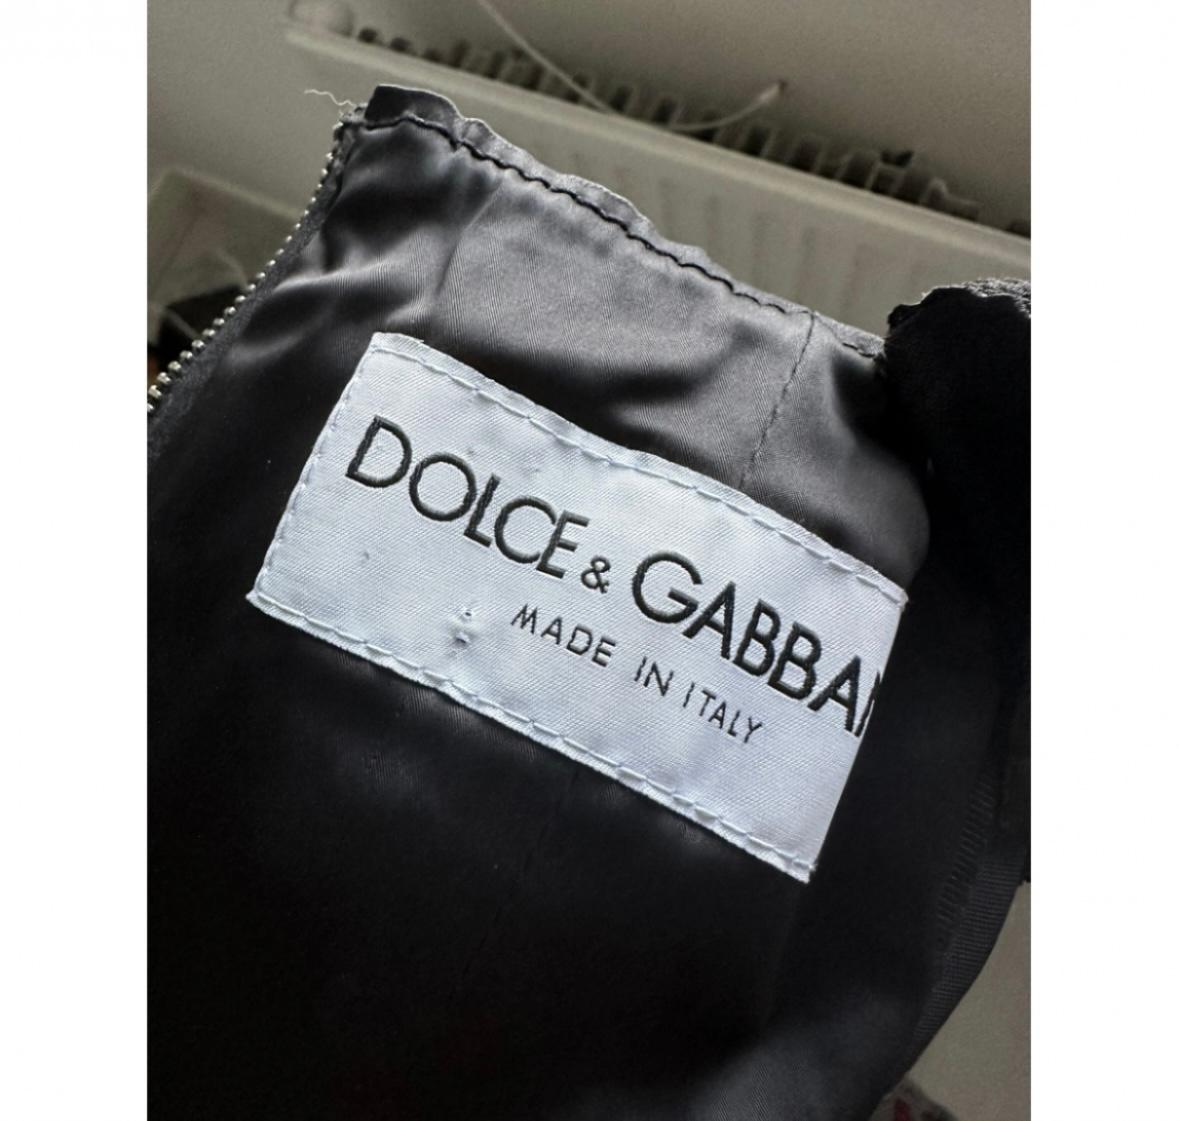 Dolce Gabbana 2000 leather studded corset  In Good Condition For Sale In Annandale, VA